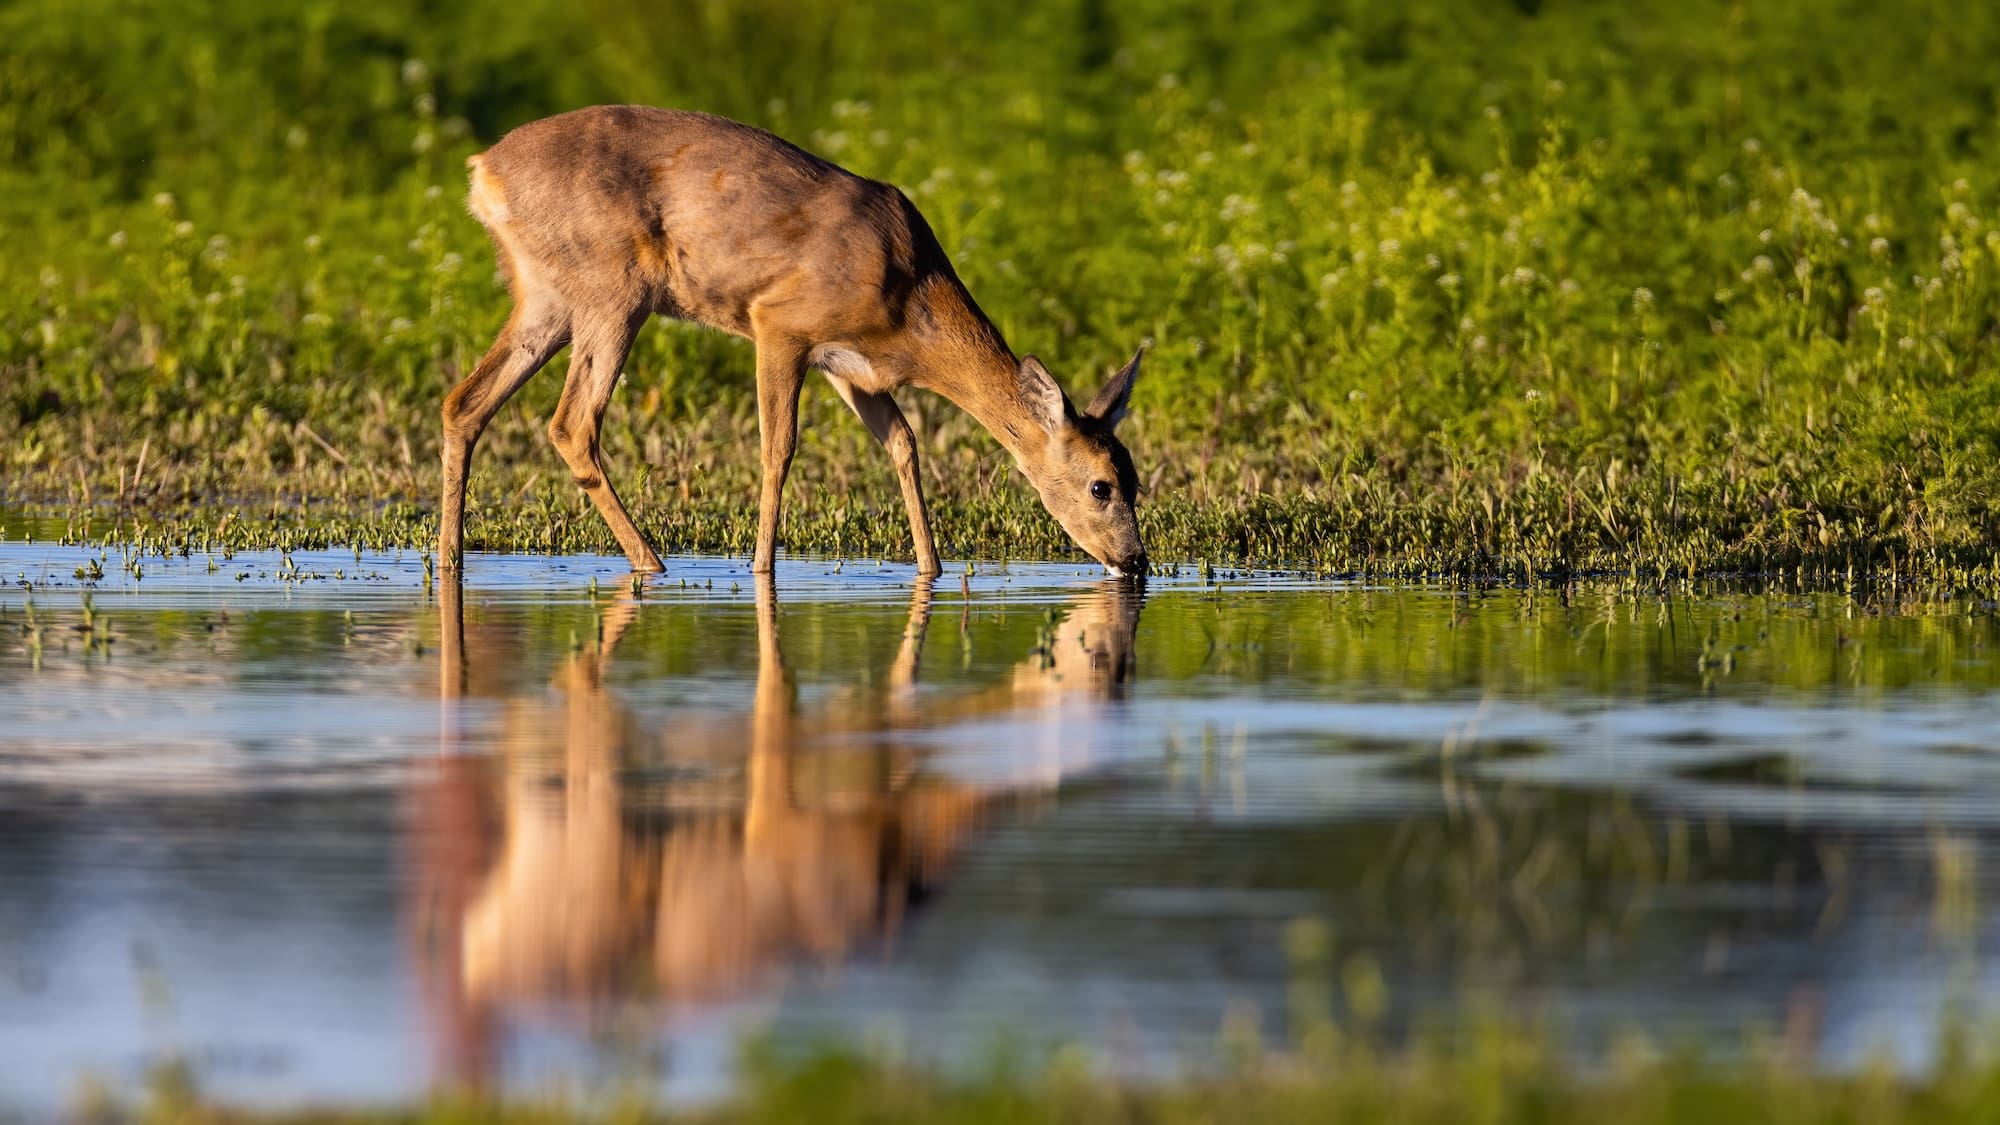 Deer drinking from splash with reflection in water.